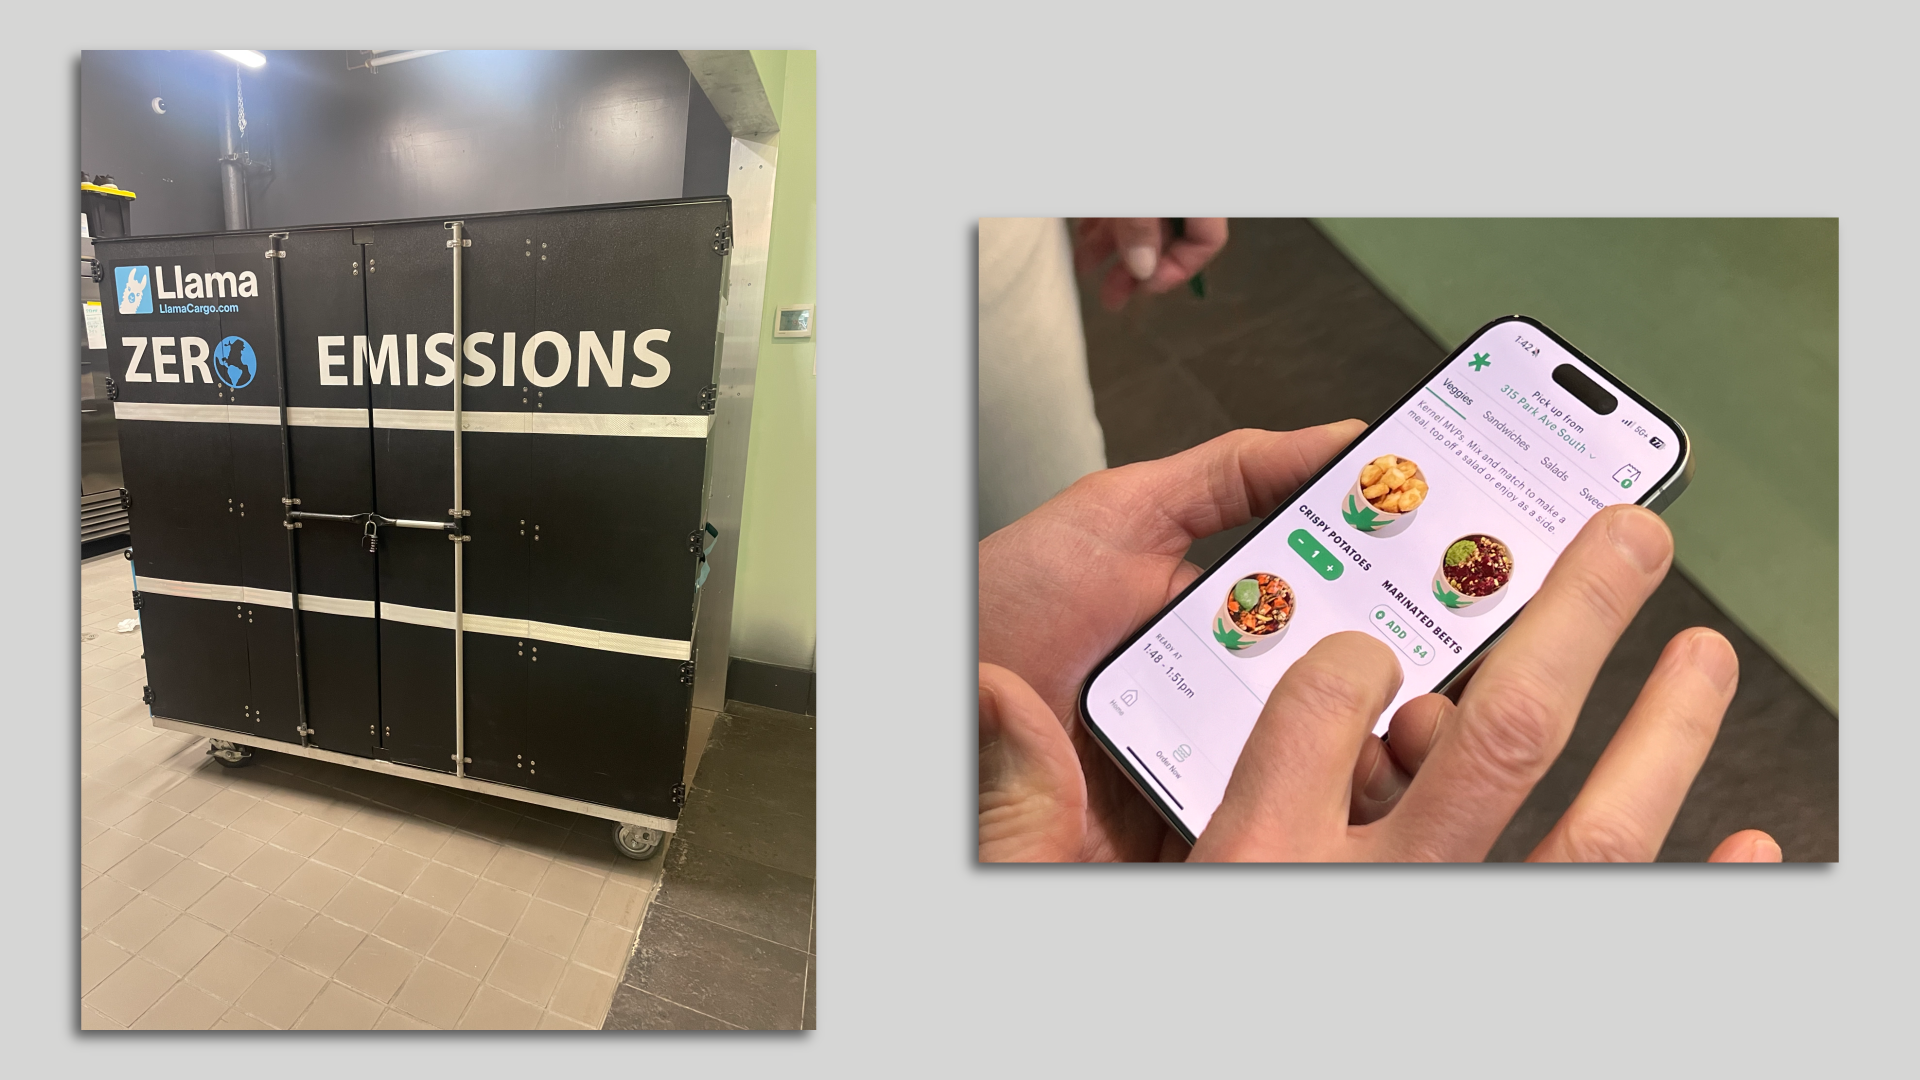 At left, a locker that delivers food from a central kitchen; at right, a phone with a hand ordering food from an app.